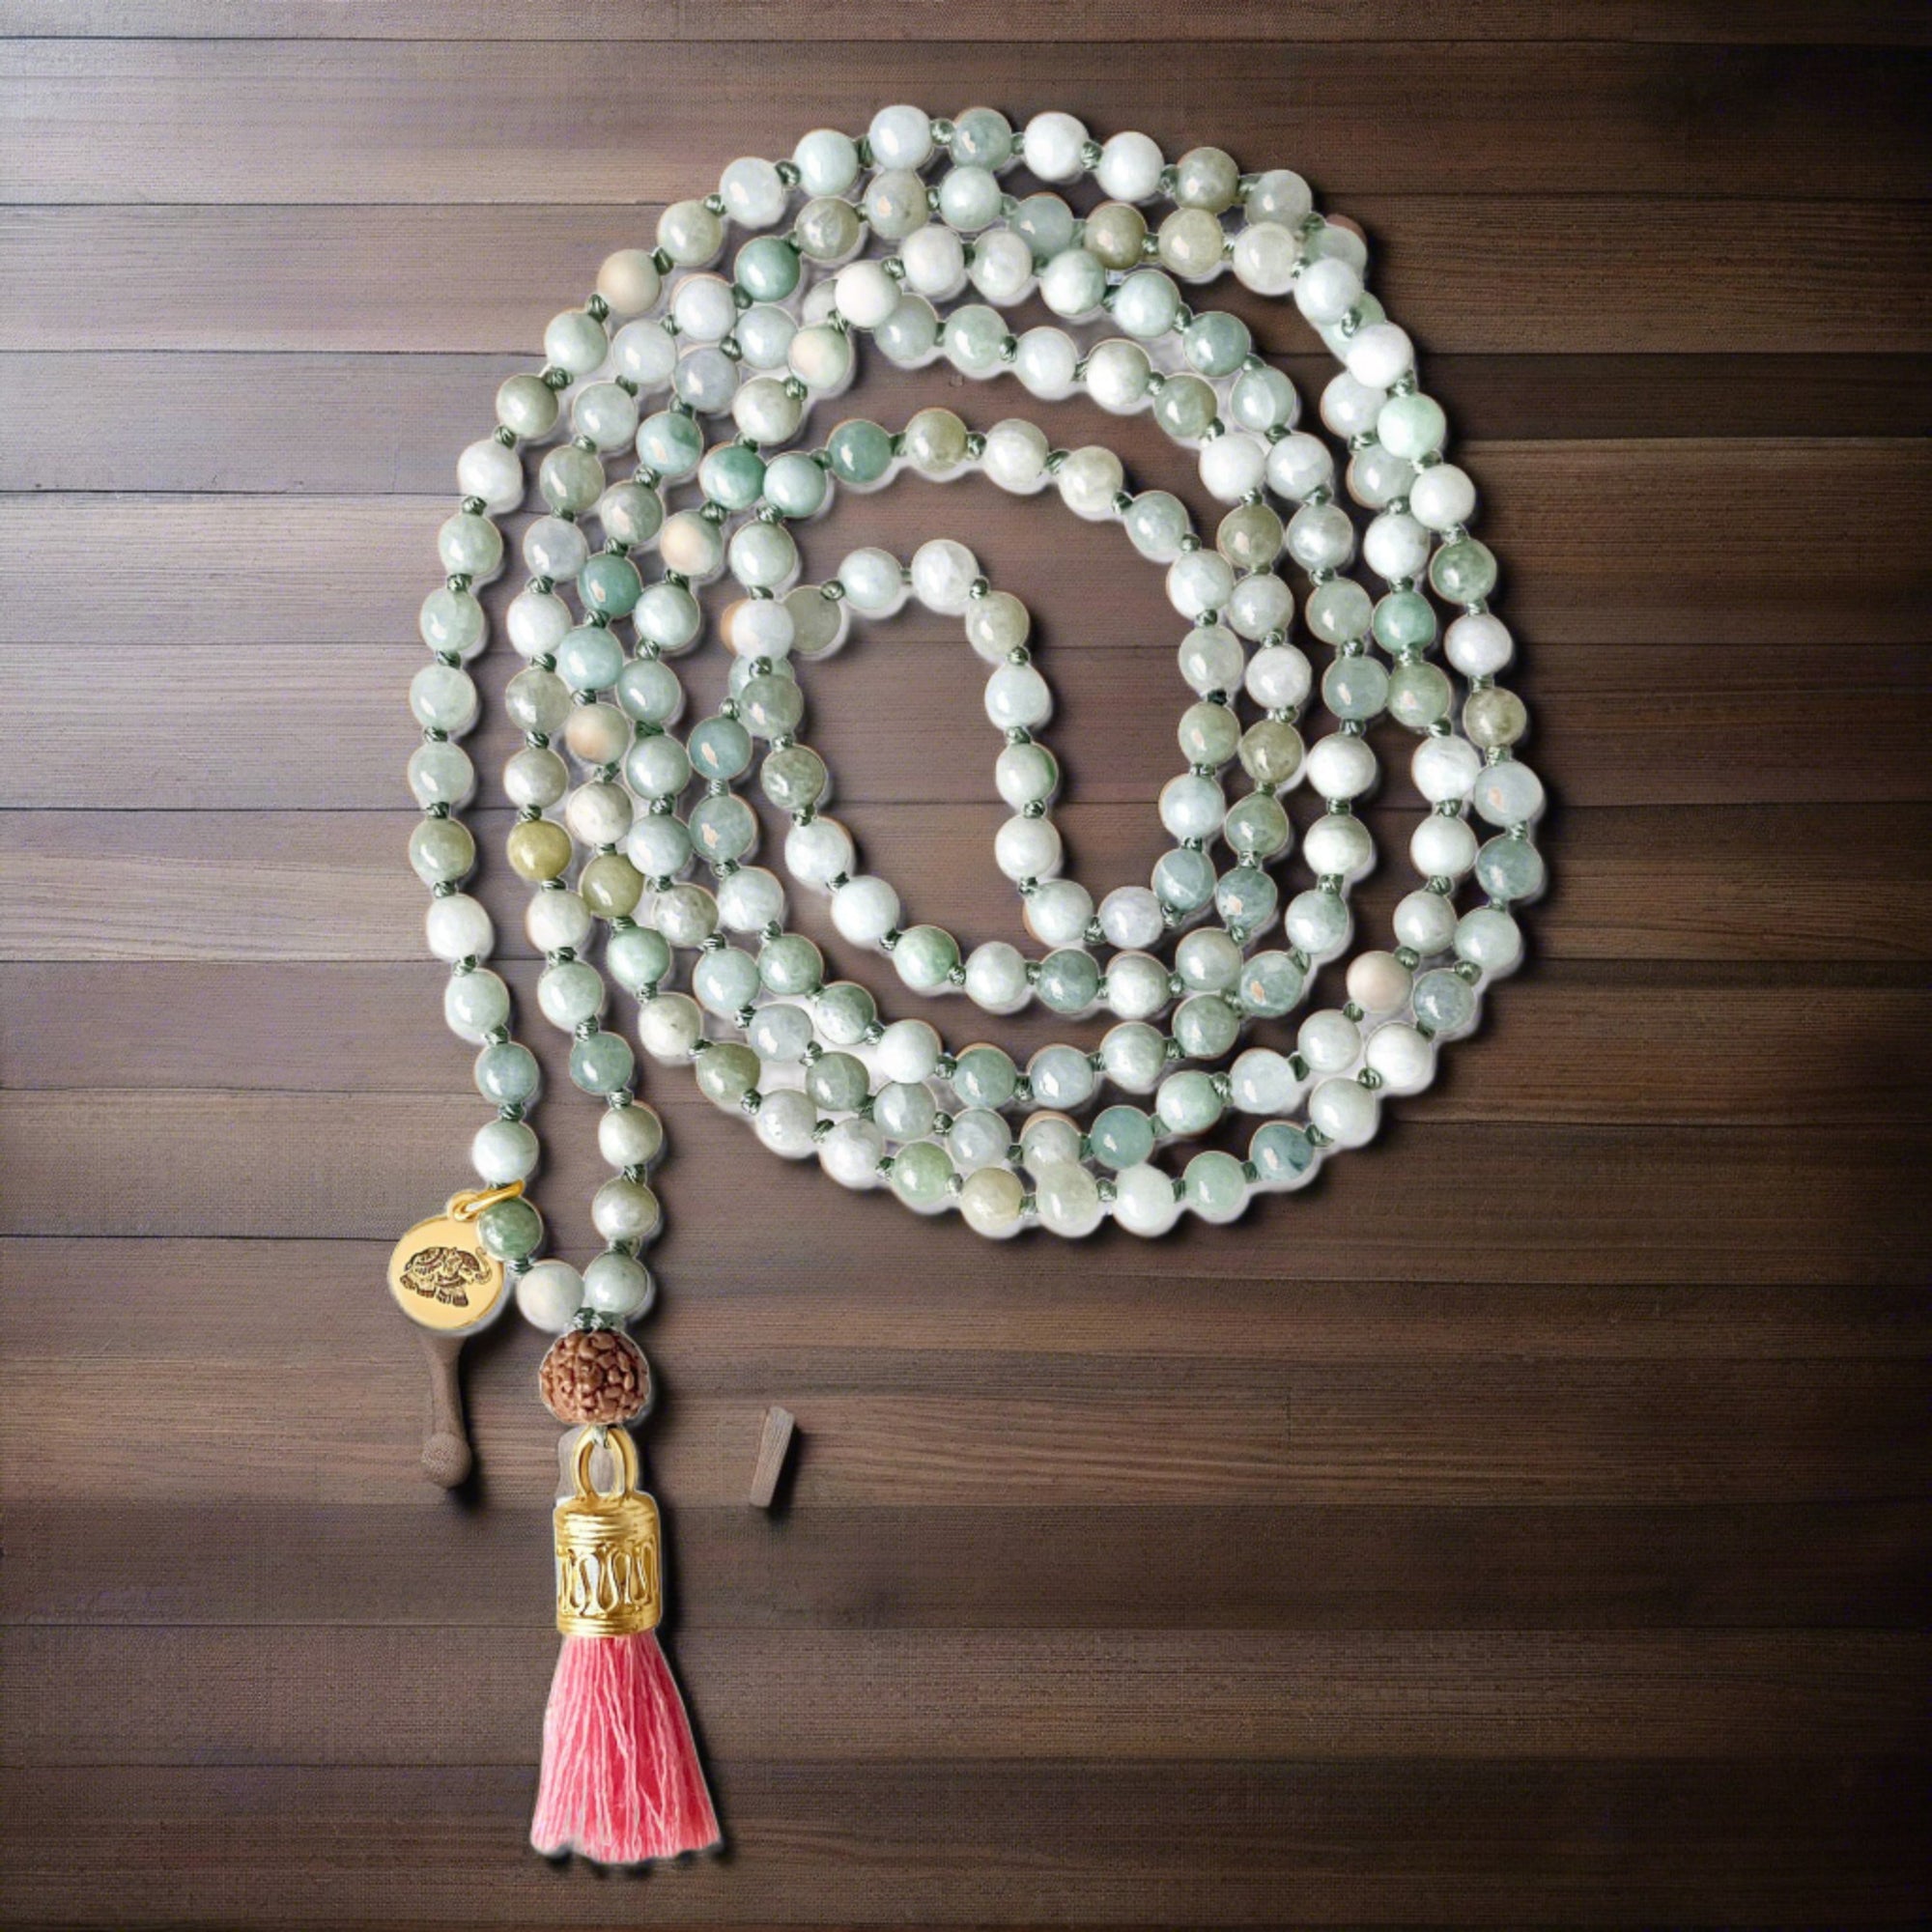 Jade Mala Prayer Bead Necklace With Rudraksha For Tranquility